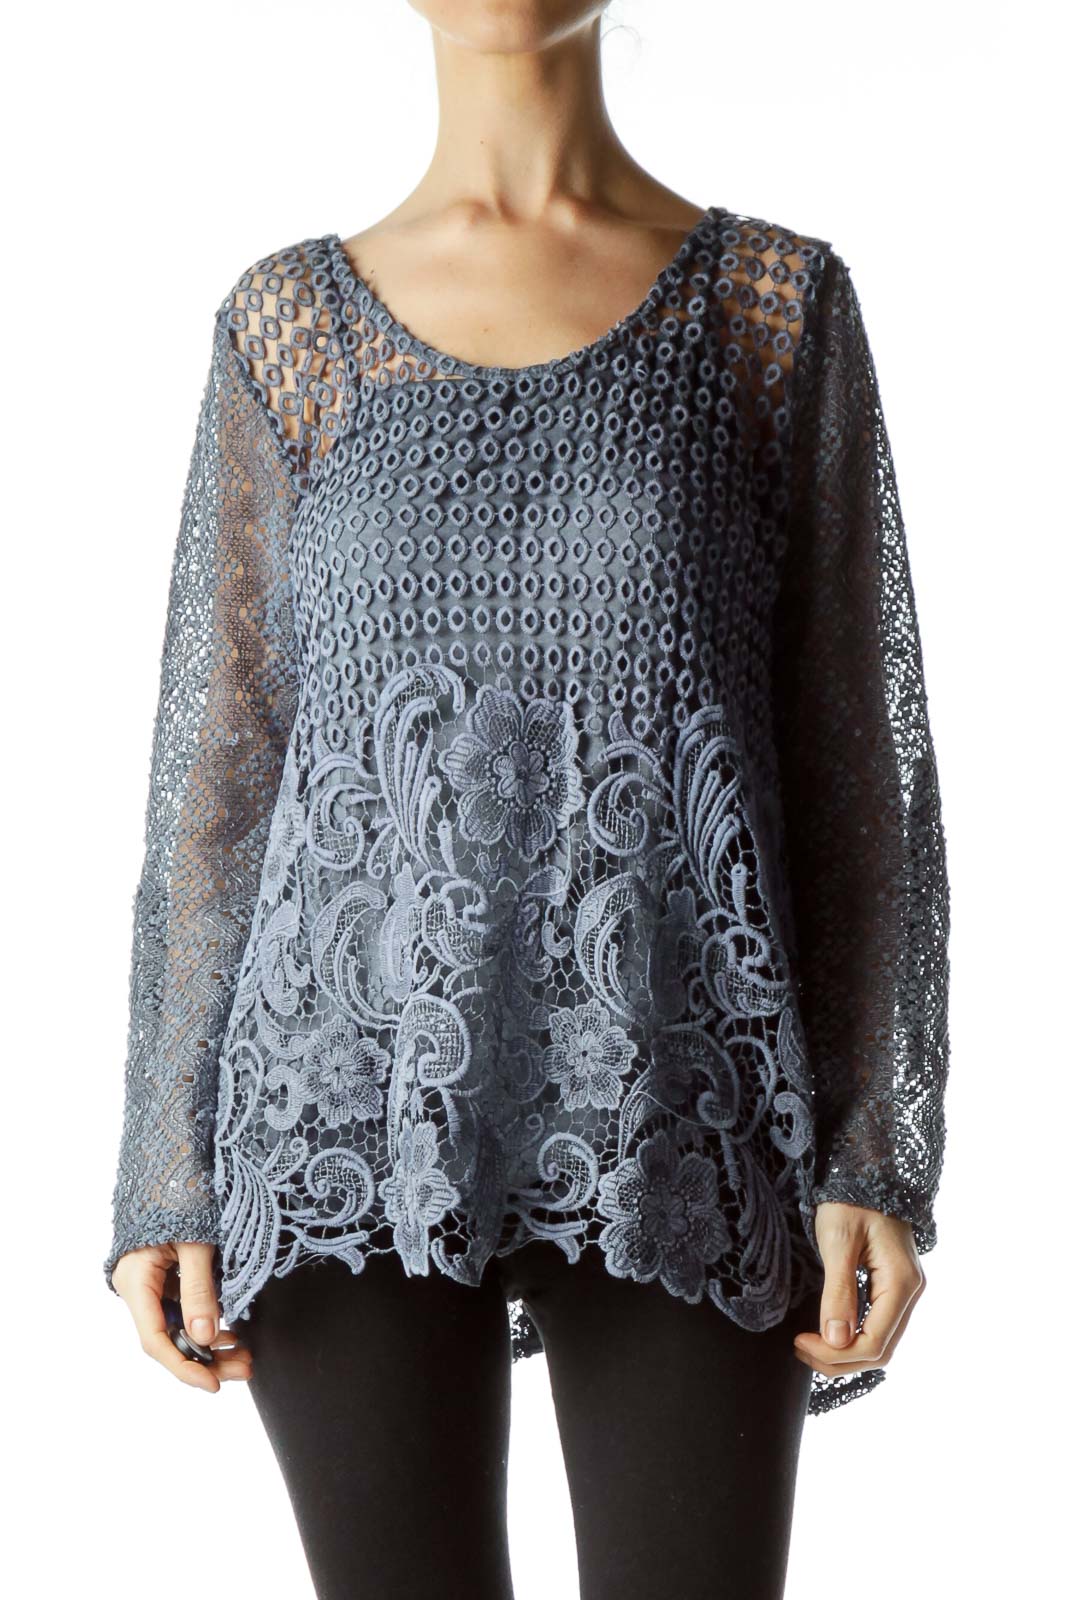 Blue Crocheted Long Sleeve Top Front